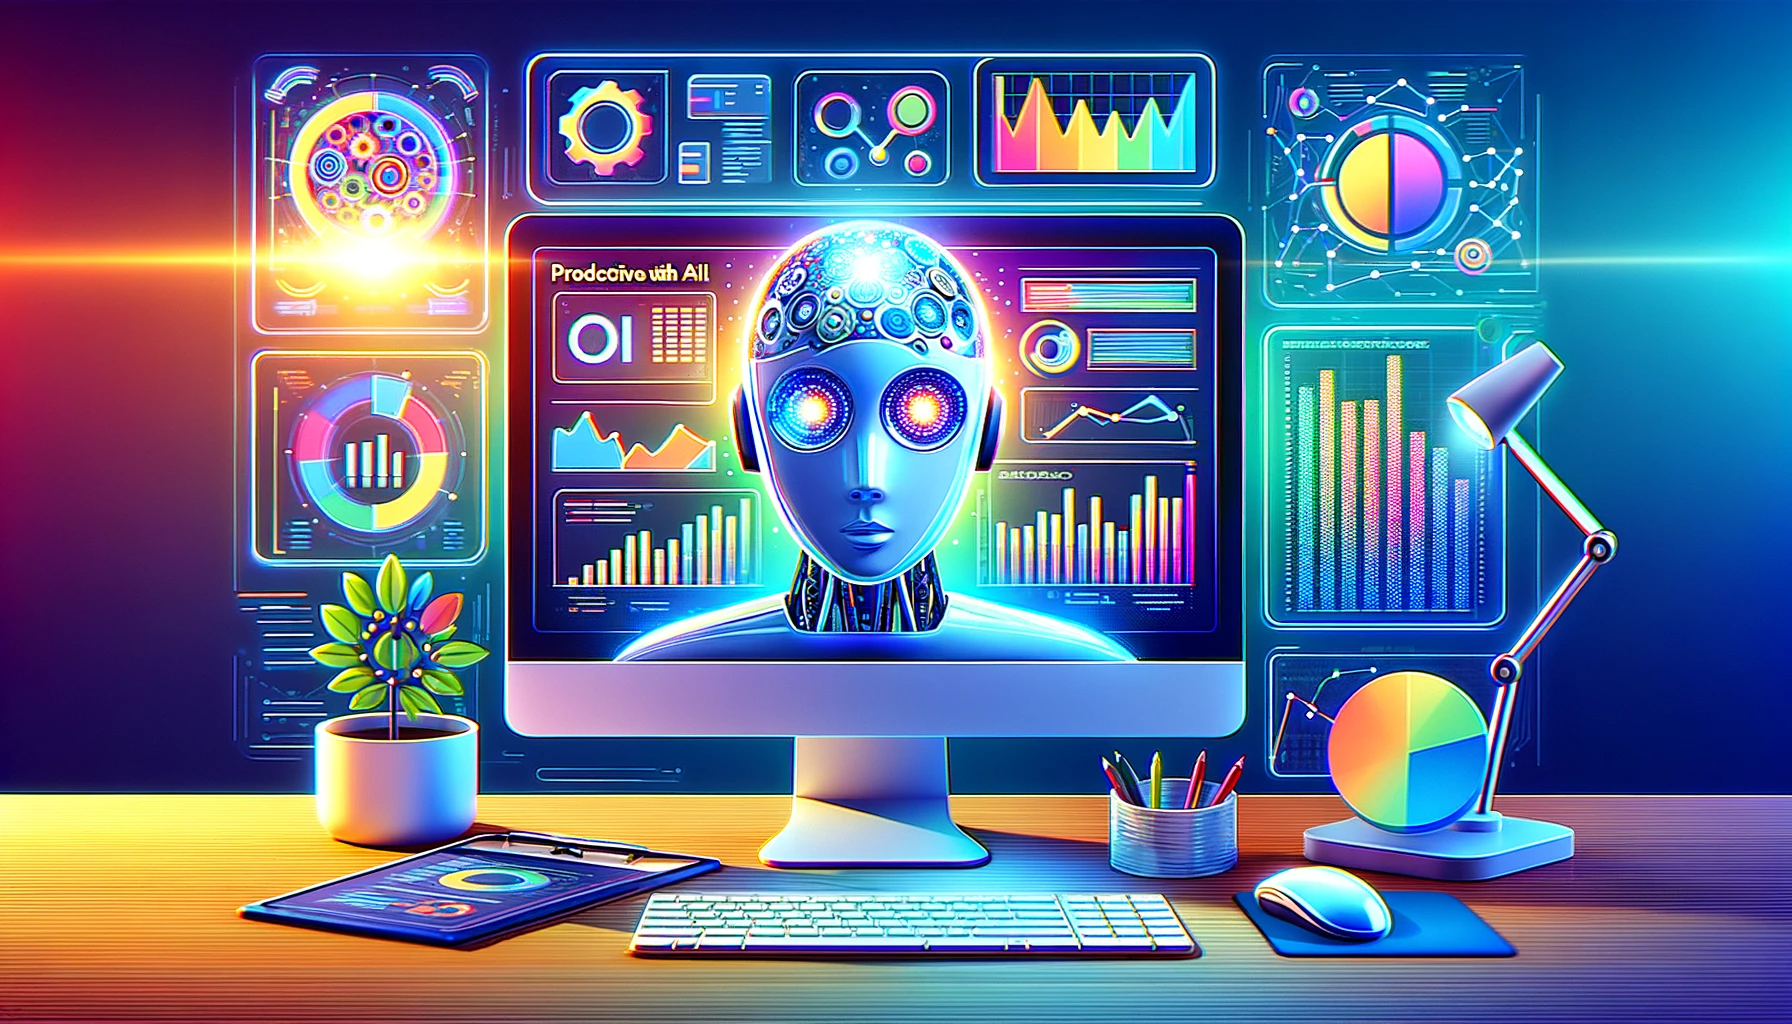 "An informative image depicting AI-driven Predictive SEO, featuring a computer screen with SEO analytics, trend graphs, and a digital brain symbolizing AI analyzing data.